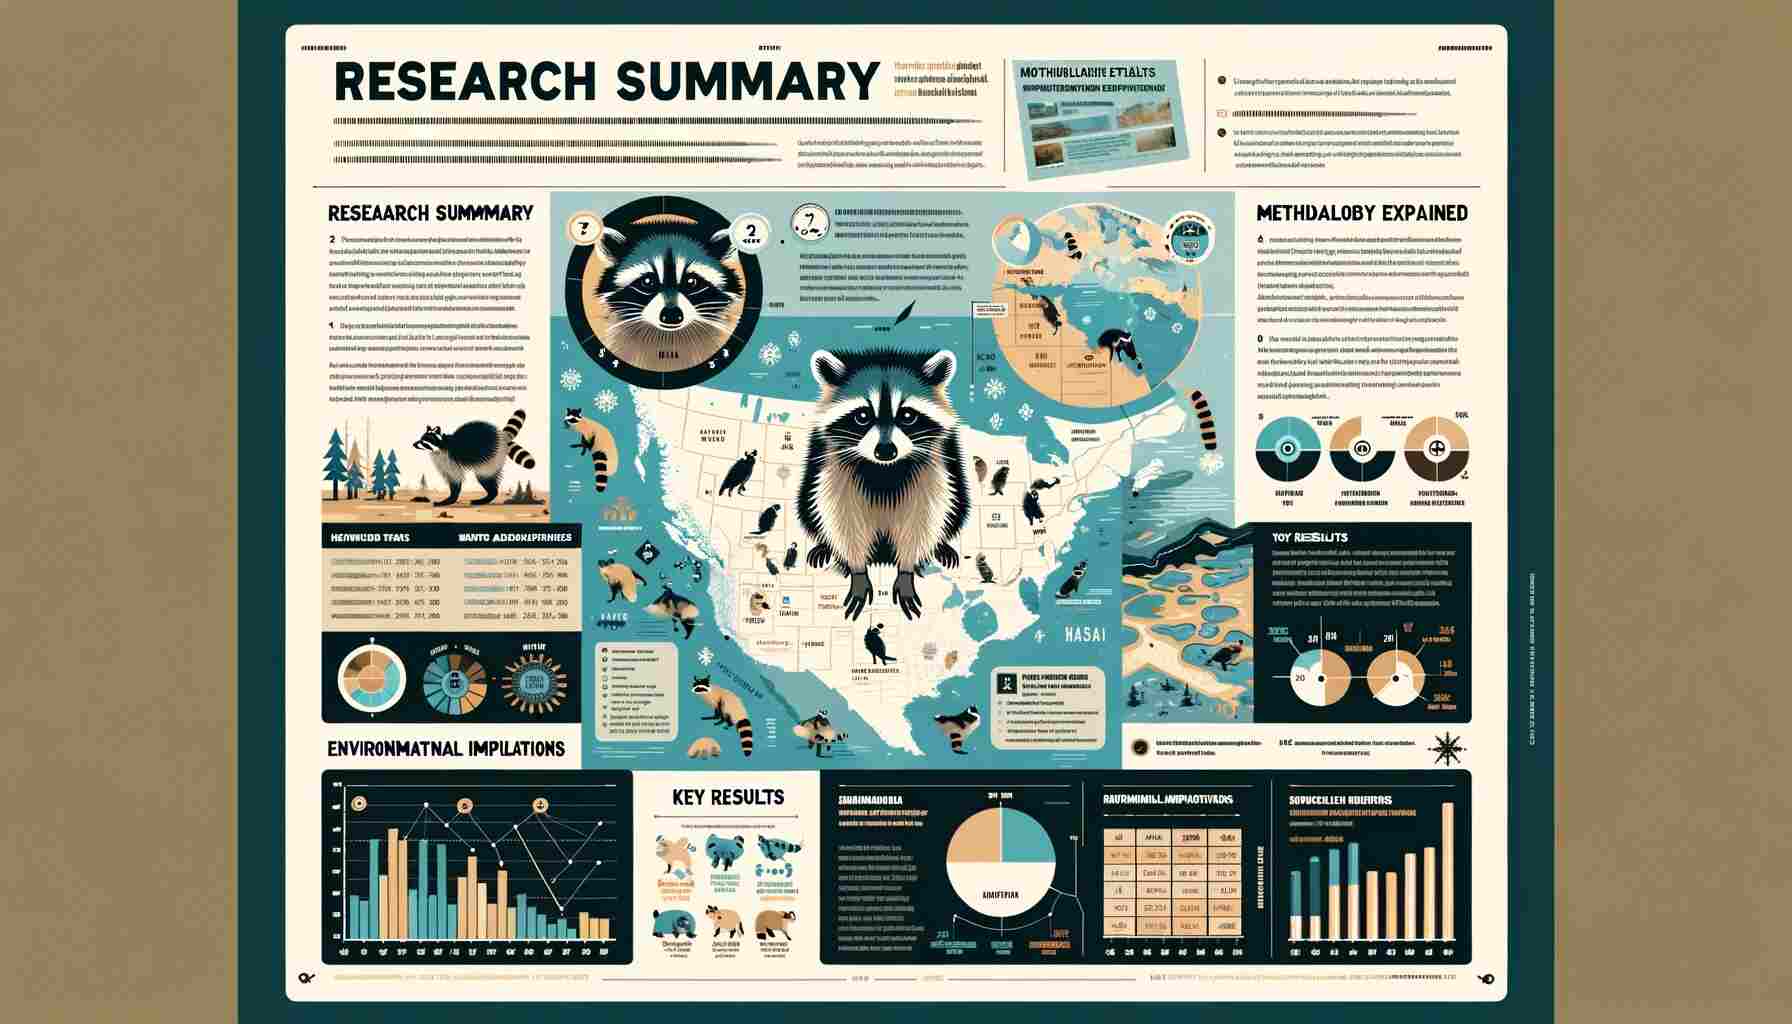 The infographic is titled "Winter Survival of Raccoons: A Detailed Study". It's divided into several sections with large, clear text and informative graphics.

Research Summary: This section provides an overview of the study on raccoons' adaptability during Manitoba's winter, depicted with an illustration of a raccoon and a snowy backdrop.

Location Details: Features a detailed map of highlighting various terrains such as agricultural areas, wetlands, and forests. The map uses distinct icons and labels for clarity.

Methodology Explained: Illustrates the tracking process of raccoons. This section includes images of tagging devices and raccoons being monitored, with brief text explaining the methods used.

Key Results: Presents statistics and graphs showing raccoon survival rates, focusing on differences based on age and sex. The graphs are simple, with bold colors and easy-to-read fonts.

Environmental Implications: Emphasizes the importance of understanding animal adaptation and habitat conservation. This section includes icons representing different habitats and a brief text on conservation efforts.

Overall, the design is straightforward, prioritizing legibility with large fonts and simple graphics, making complex information easily accessible.